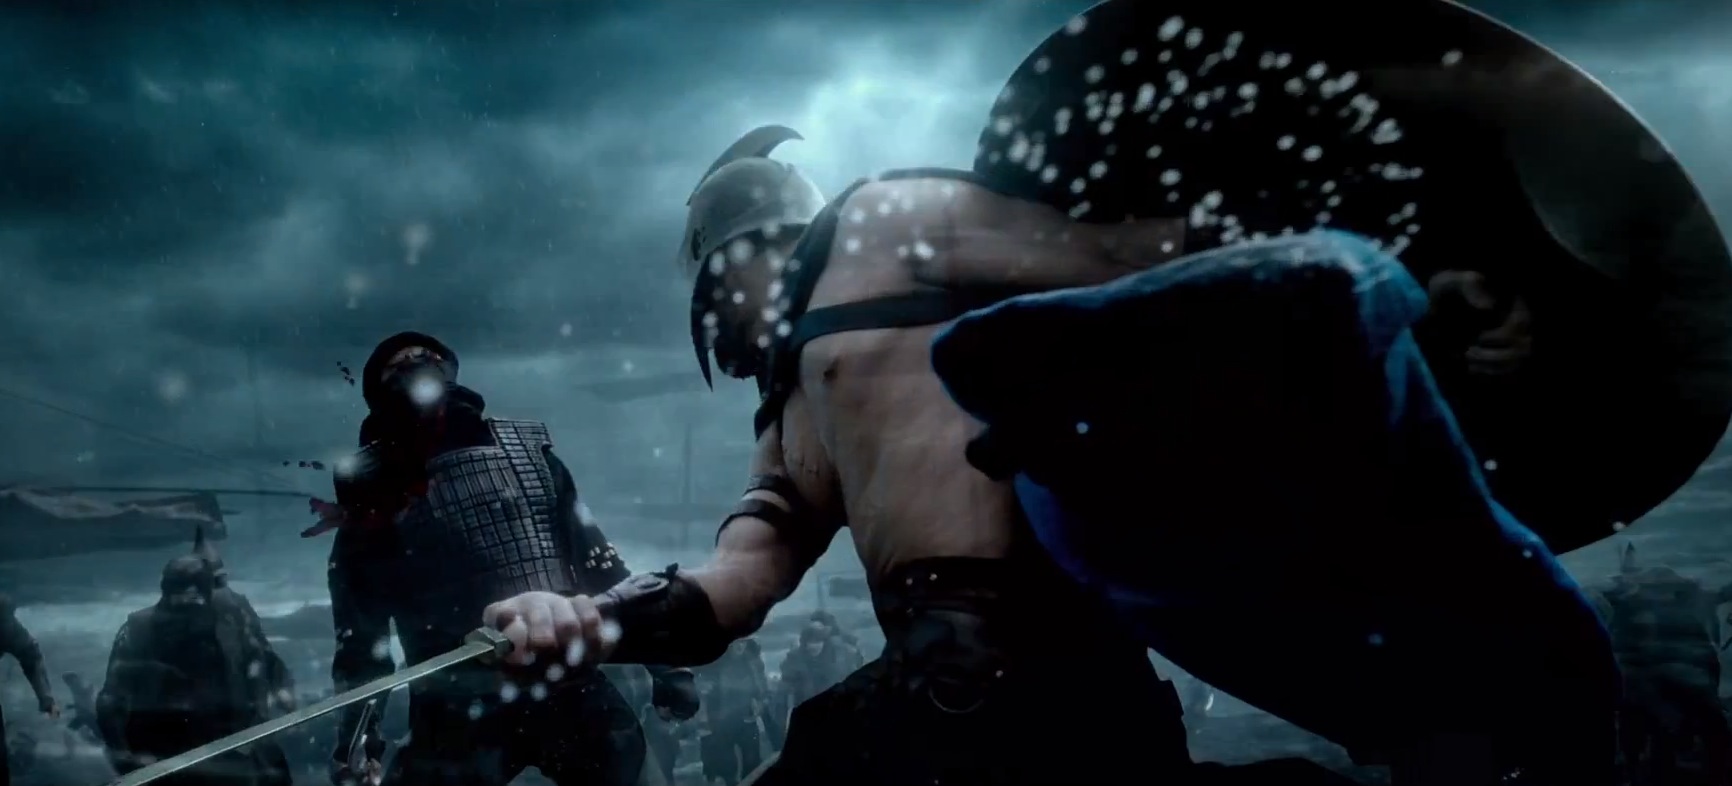 300 - Rise of an Empire4